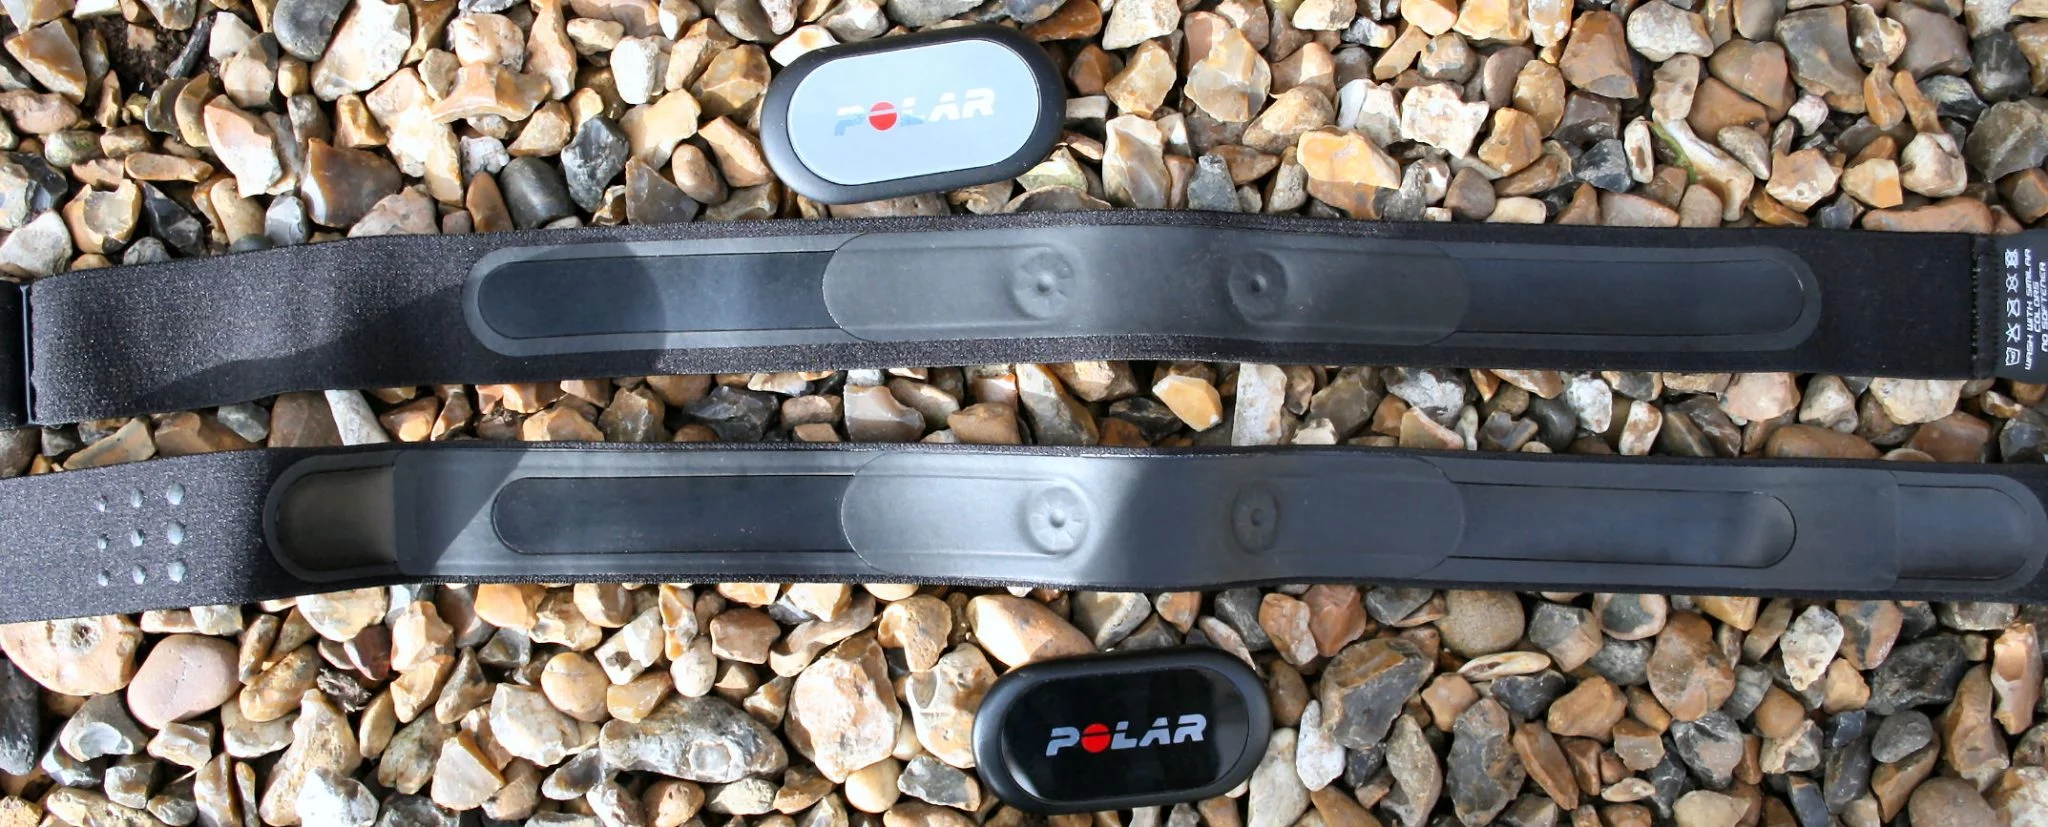 Polar H10 Heart Rate Monitor Chest Sensor and Soft Strap (and some  comparisons to the H9 and Scosche RHYTHM+) - Review - Random Bits & Bytes  Blog